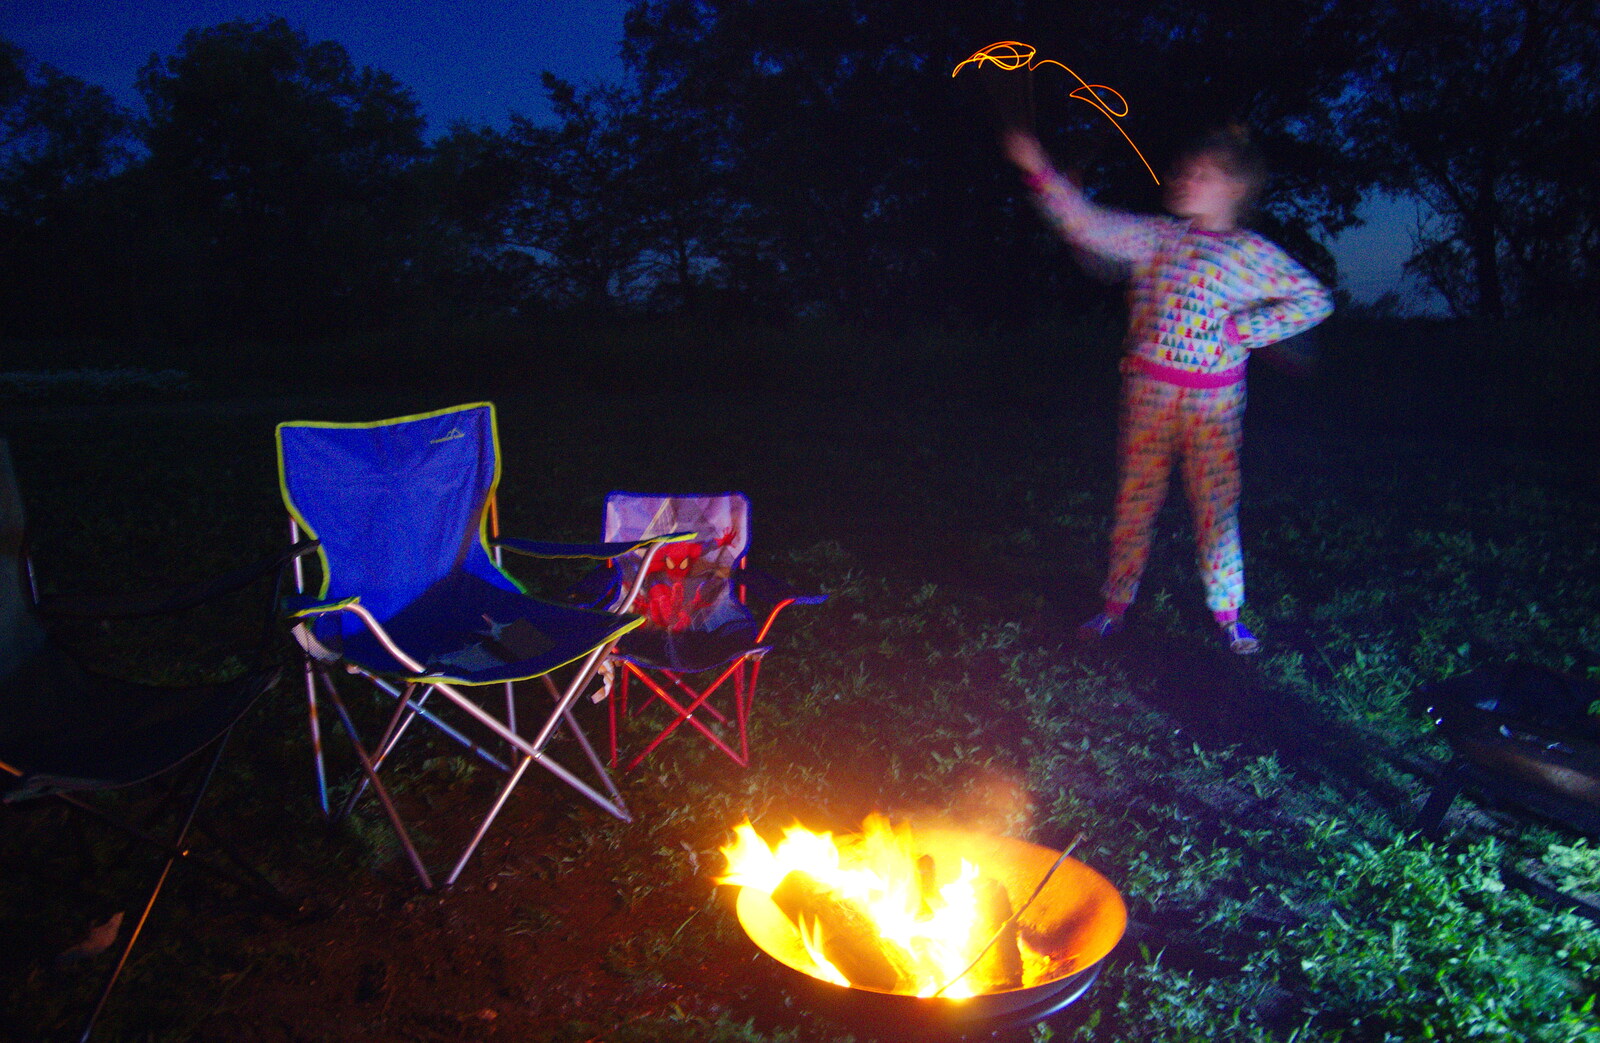 Lydia waves a fiery stick around in the dark from Camping at Three Rivers, Geldeston, Norfolk - 1st June 2019